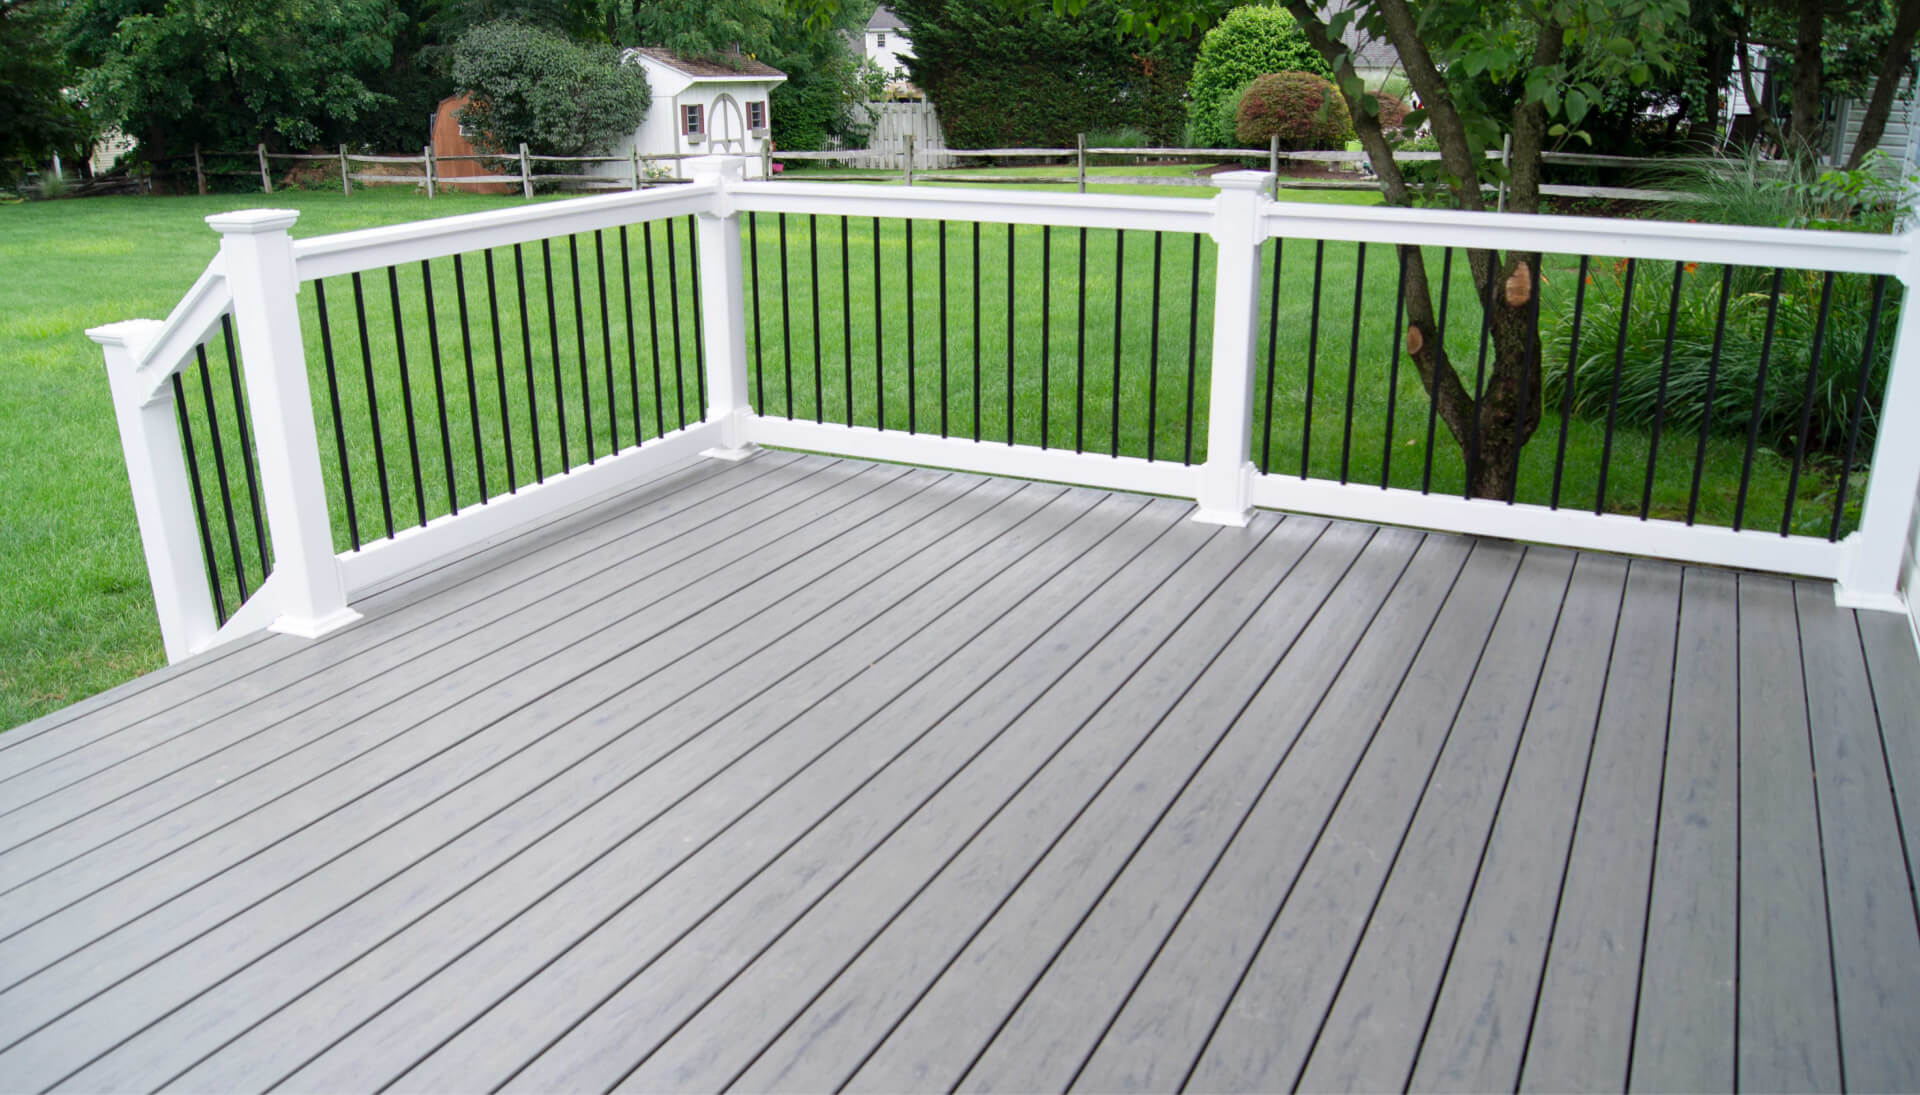 Grace your front lawn with a fresh deck with railings in Green Bay, WI